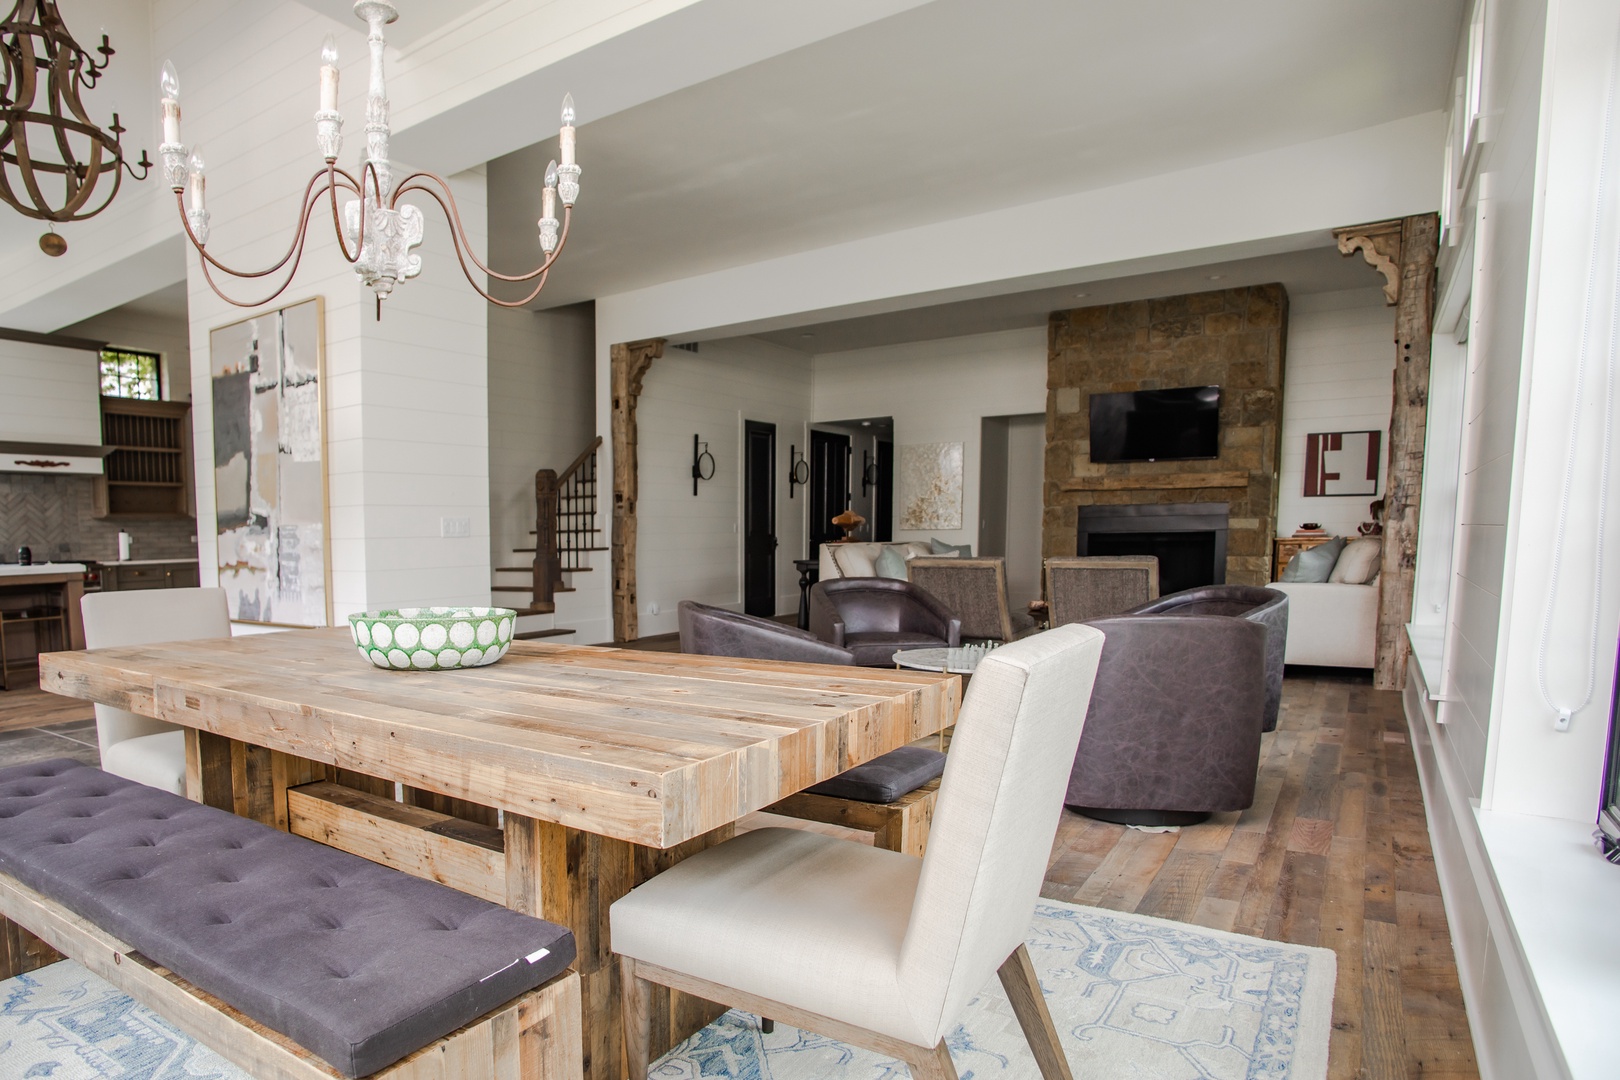 This former retail gathering place has been painstakingly refurbished into a stunning residential home.